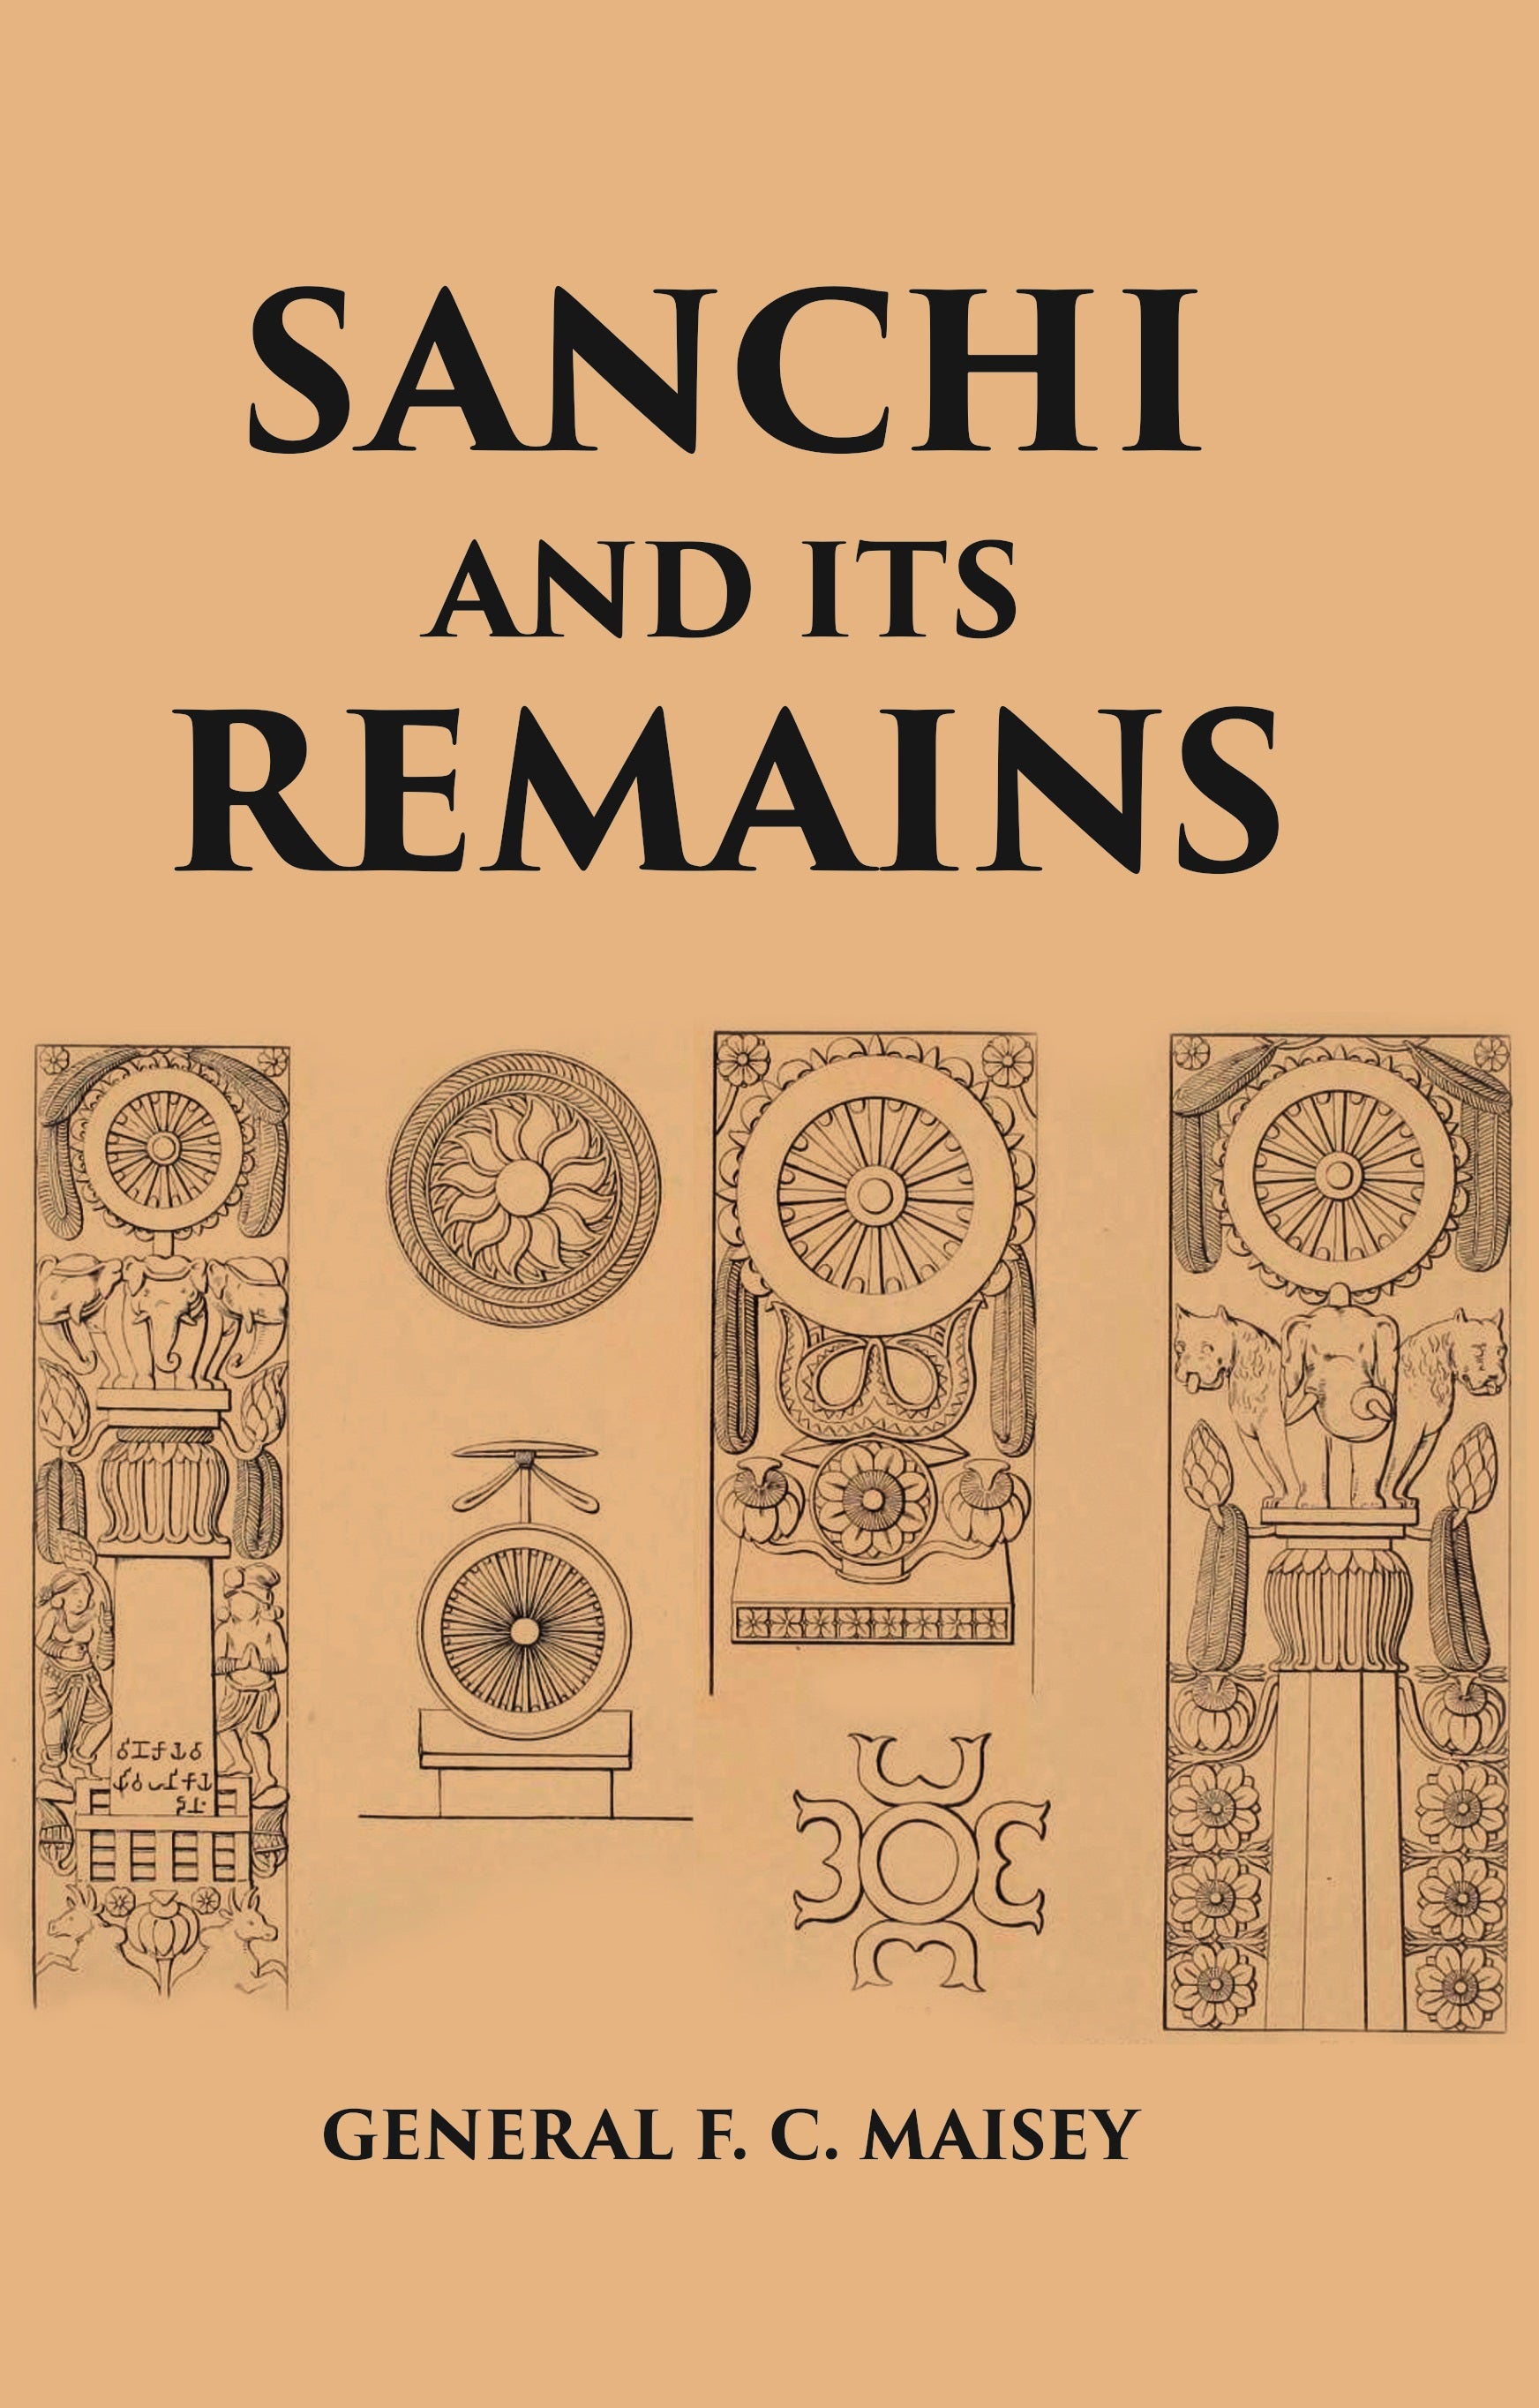 SANCHI AND ITS REMAINS: A FULL DESCRIPTION OF THE ANCIENT BUILDINGS, SCULPTURES, AND INSCRIPTIONS AT SANCHI, NEAR BHILSA, IN CENTRAL INDIA